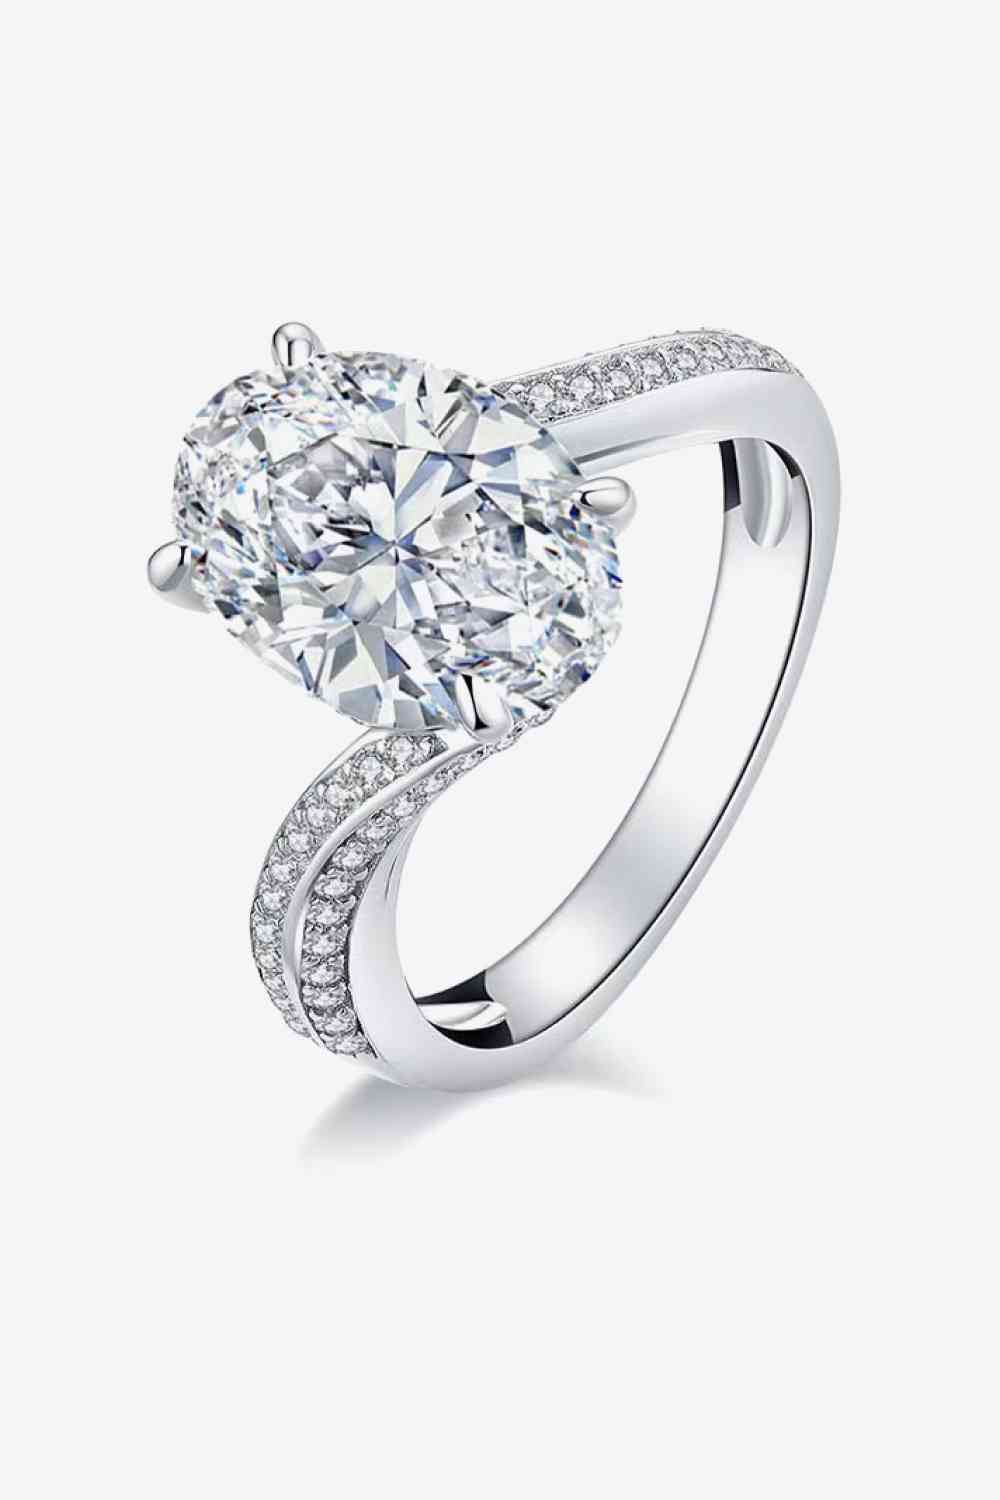 a diamond engagement ring with a center stone